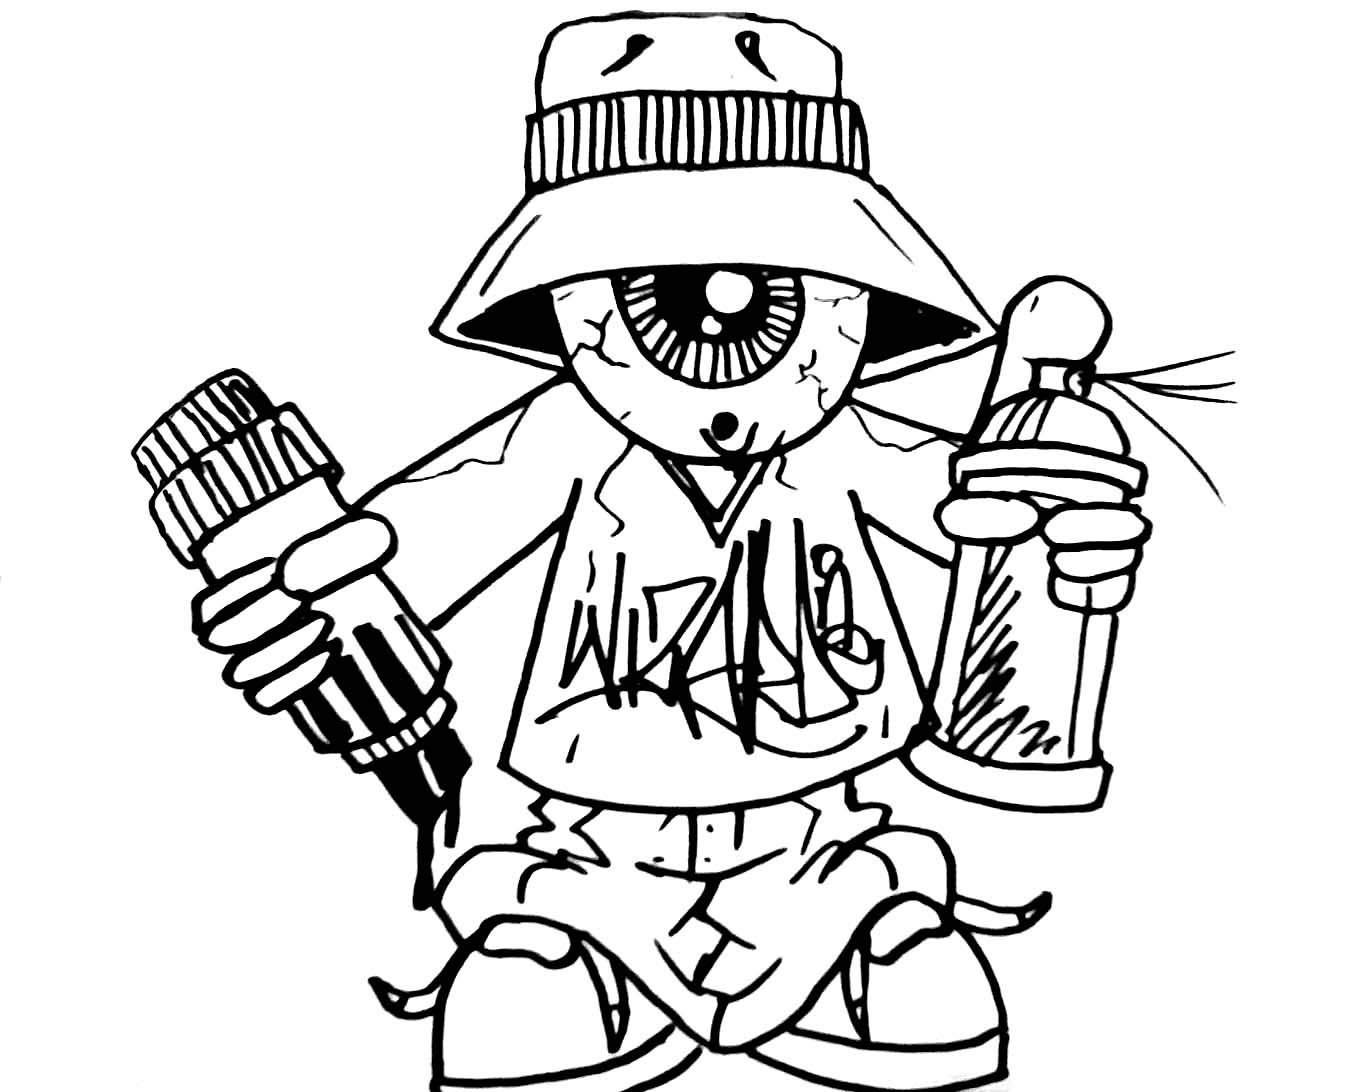 graffiti spray can coloring pages